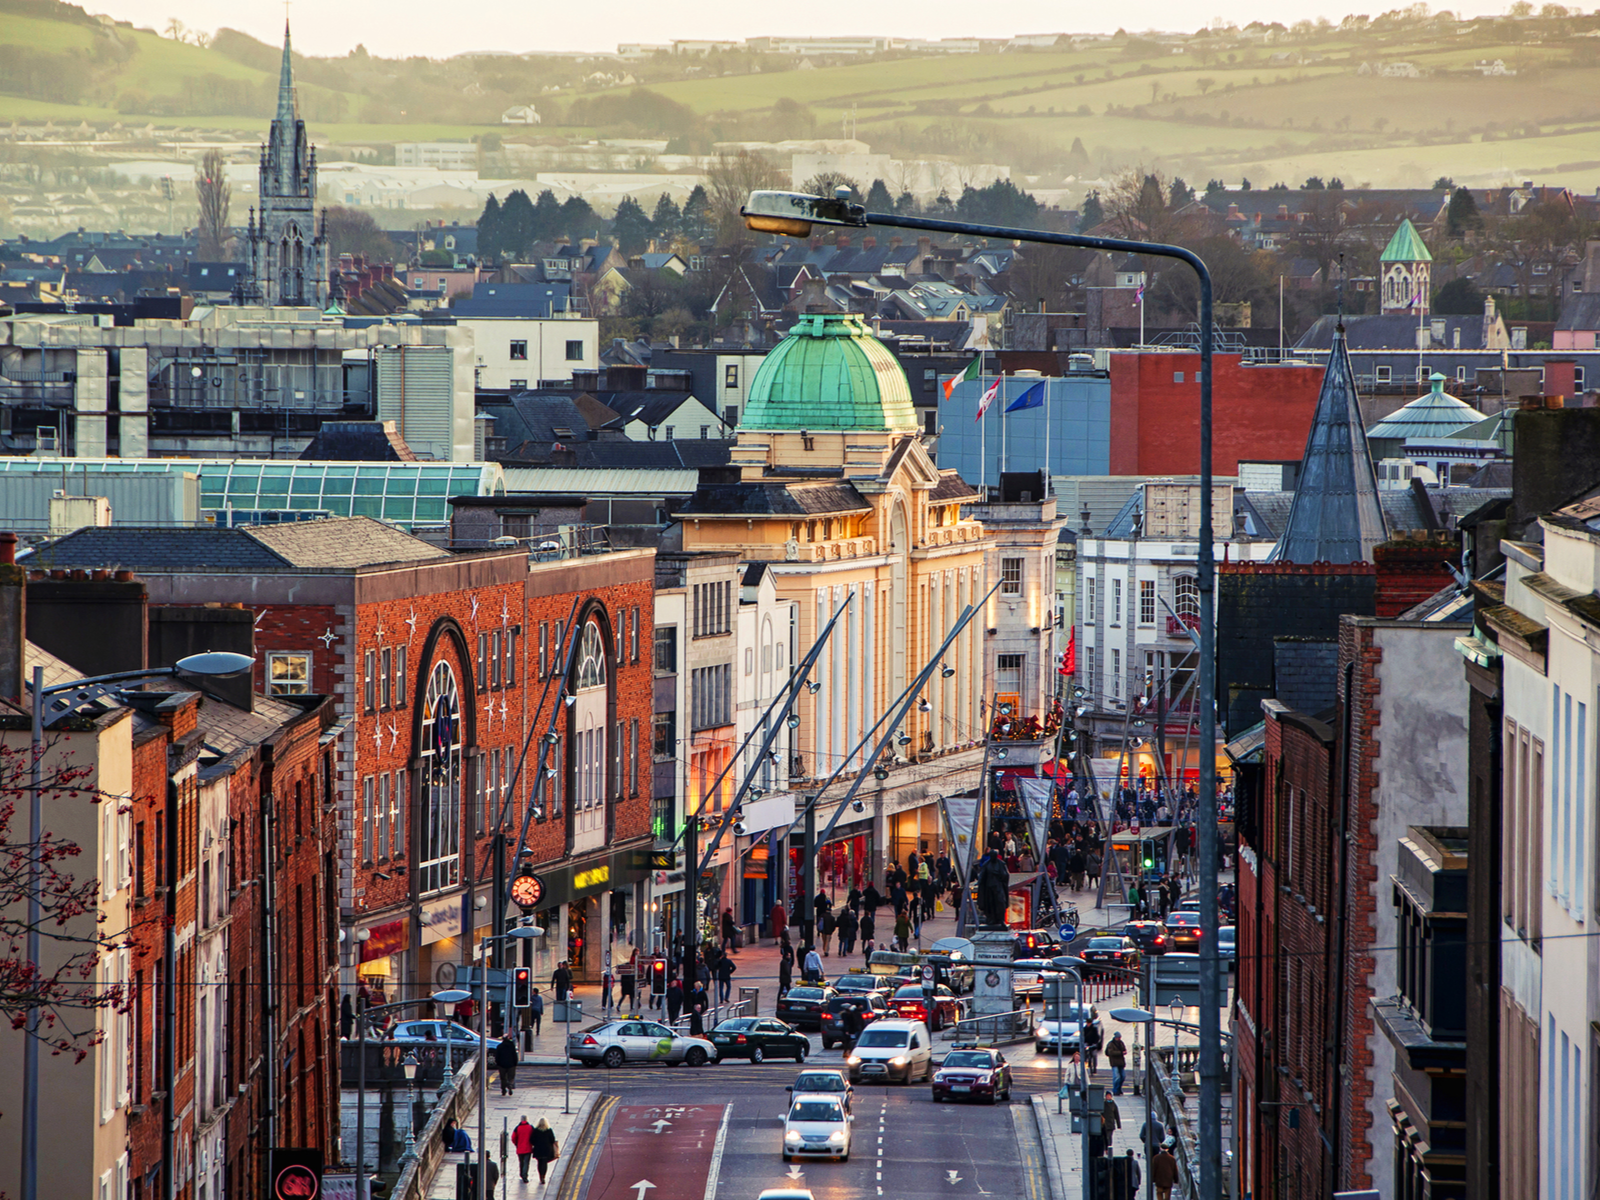 A busy day at Cork, one of the best places to visit in Ireland, with its various shops, bars and restaurants